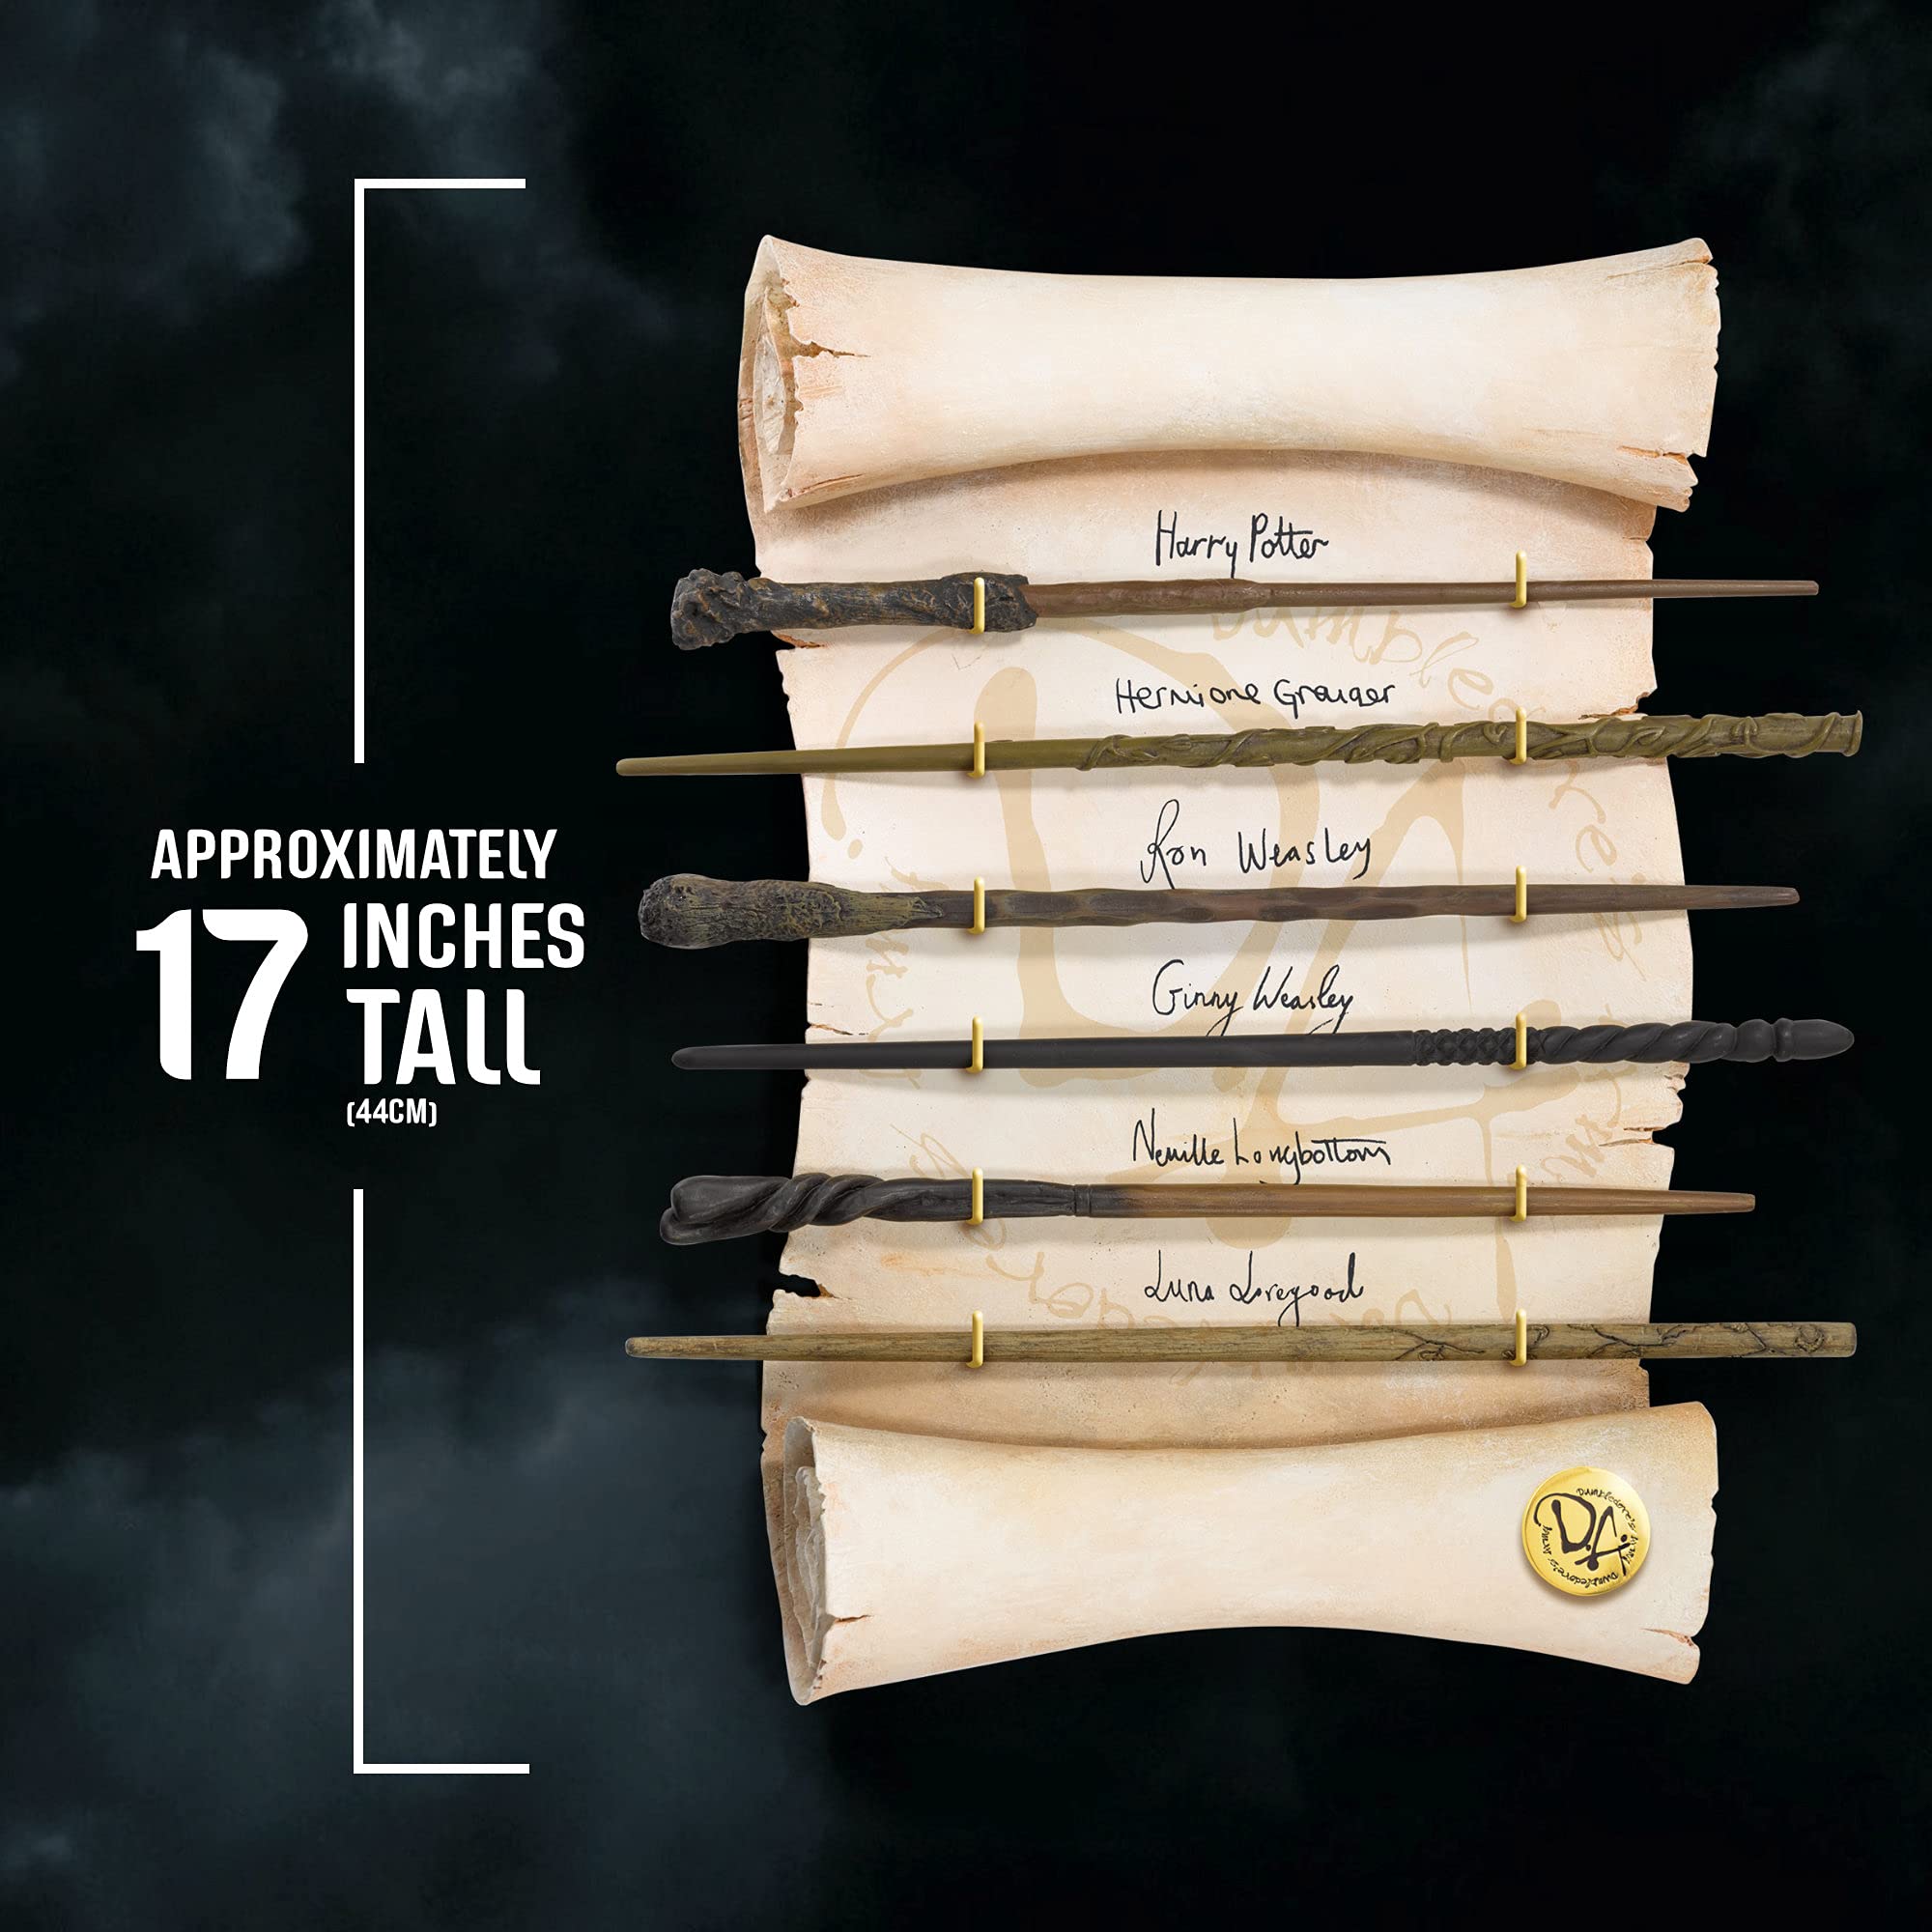 The Noble Collection Harry Potter Dumbledore's Army Wand Collection - Set of 6 Prop Replica Wands on 17in (44cm) Resin Scroll Display - Officially Licensed Film Set Movie Gifts